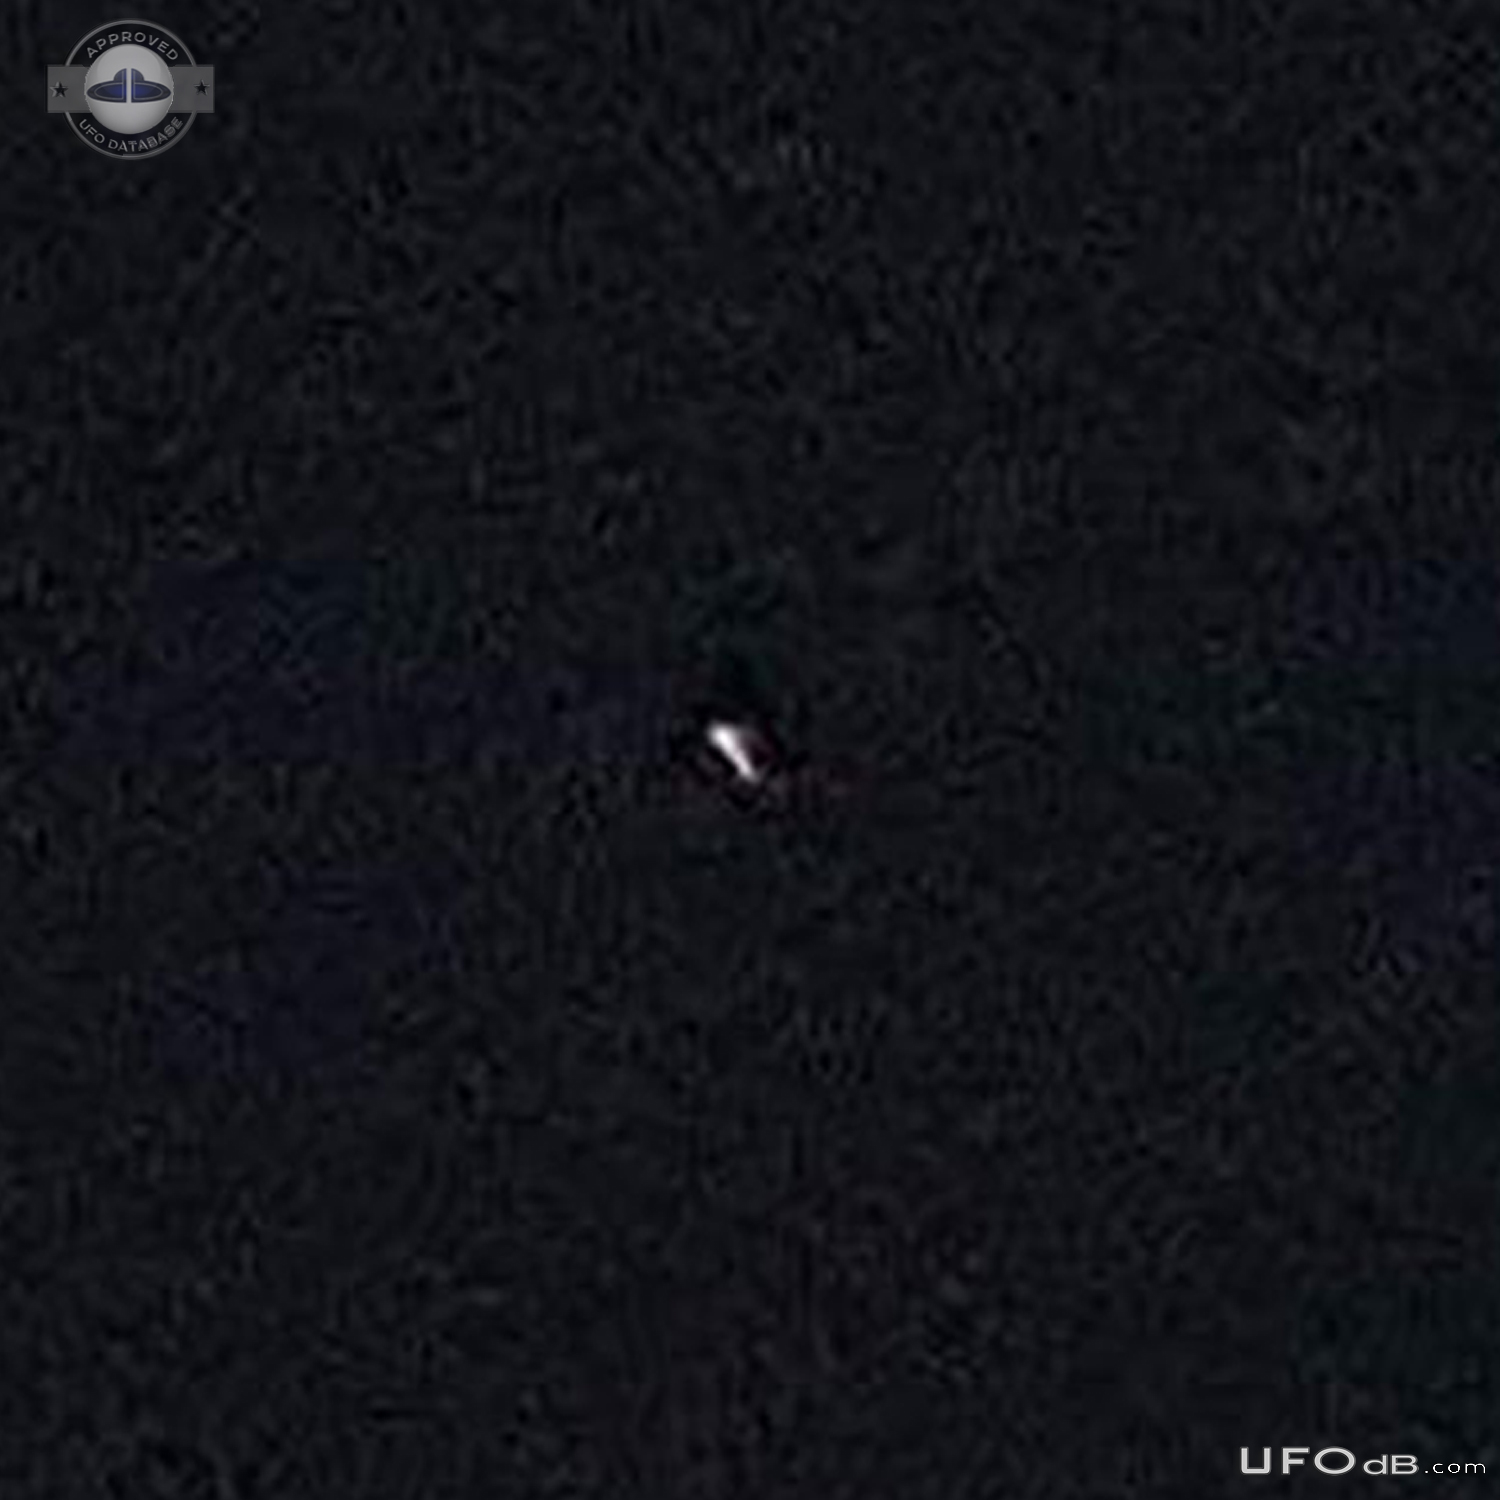 Bright UFO moved fast - like a star but moved - Tucson Arizona USA 201 UFO Picture #798-6